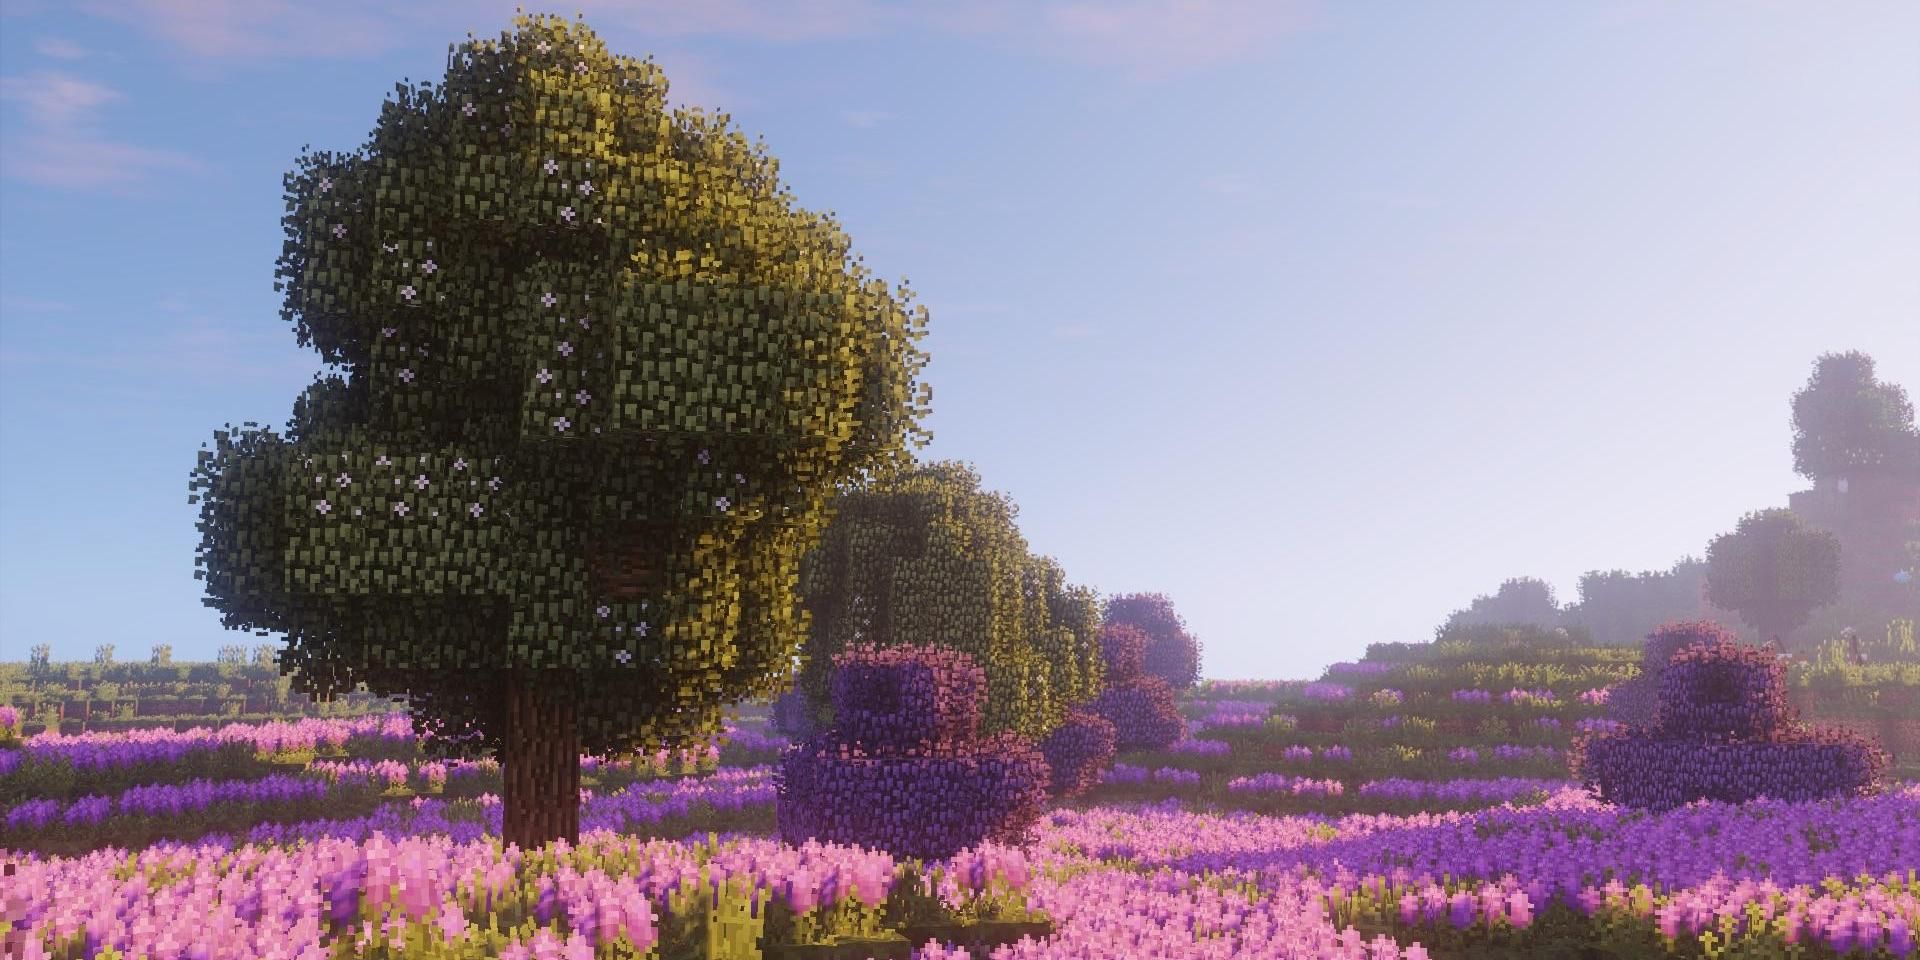 A peaceful flowery field with trees in Minecraft.